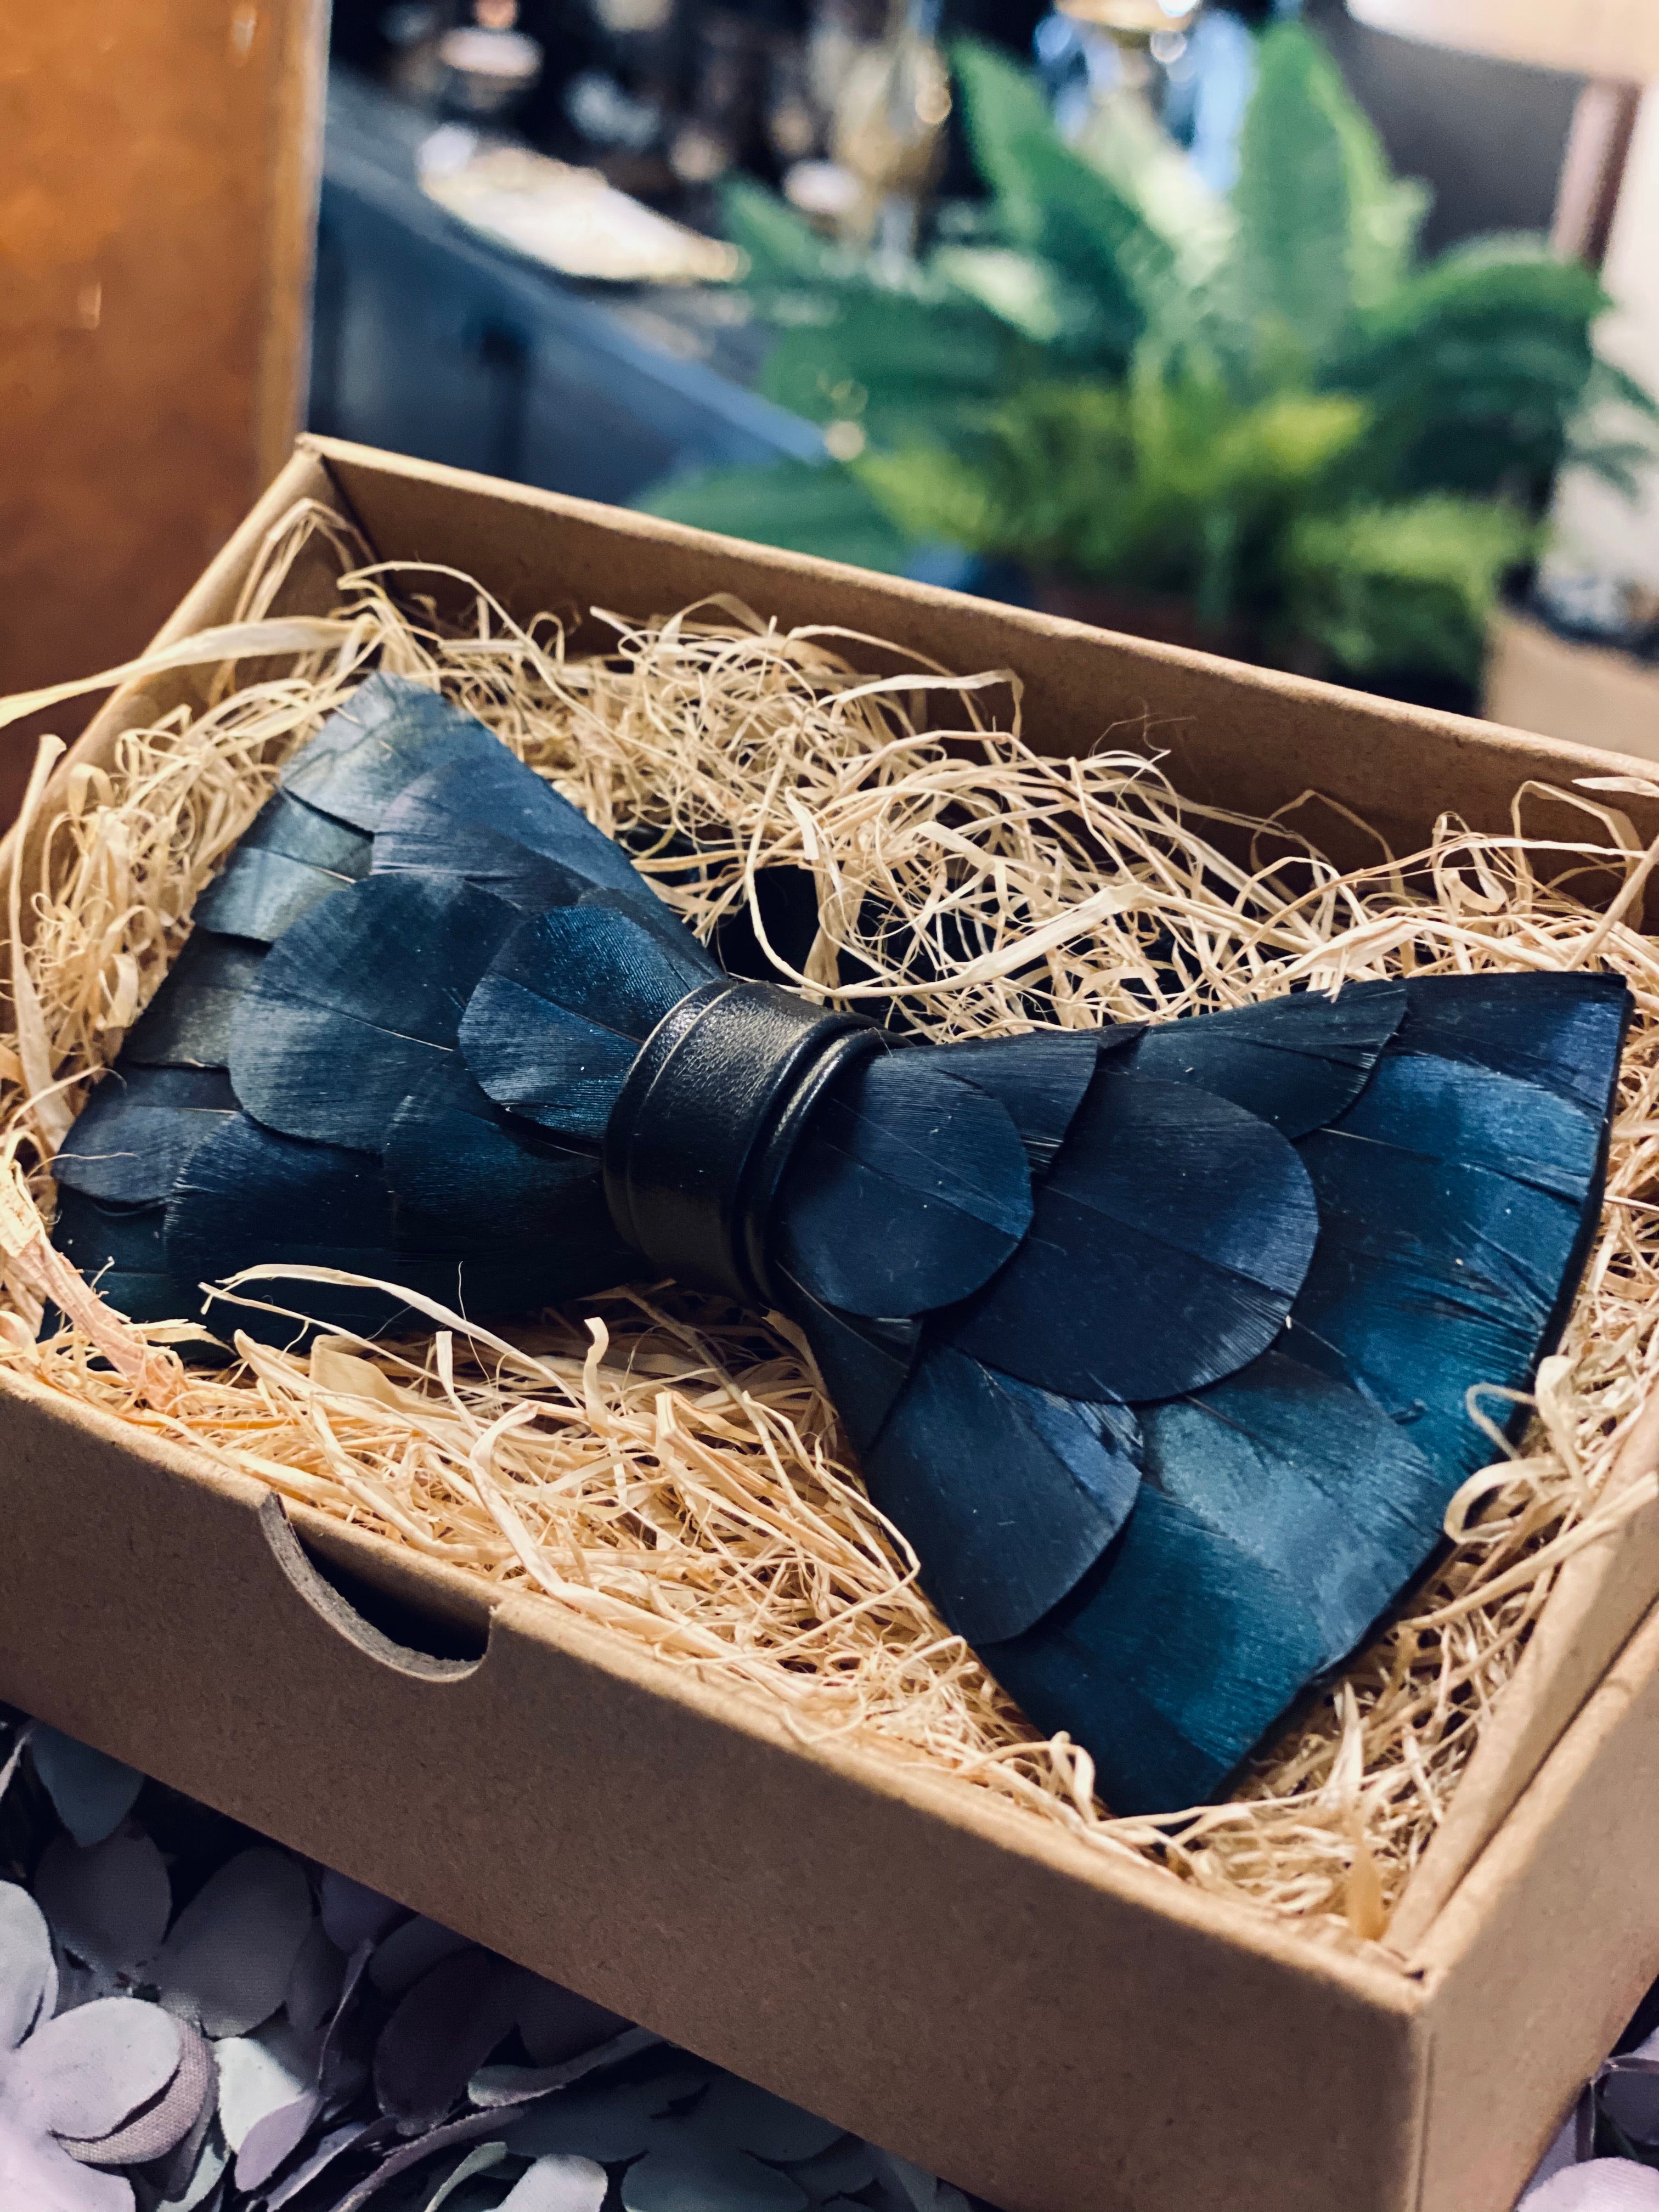 Handmade Feather Bow Tie - Various Styles